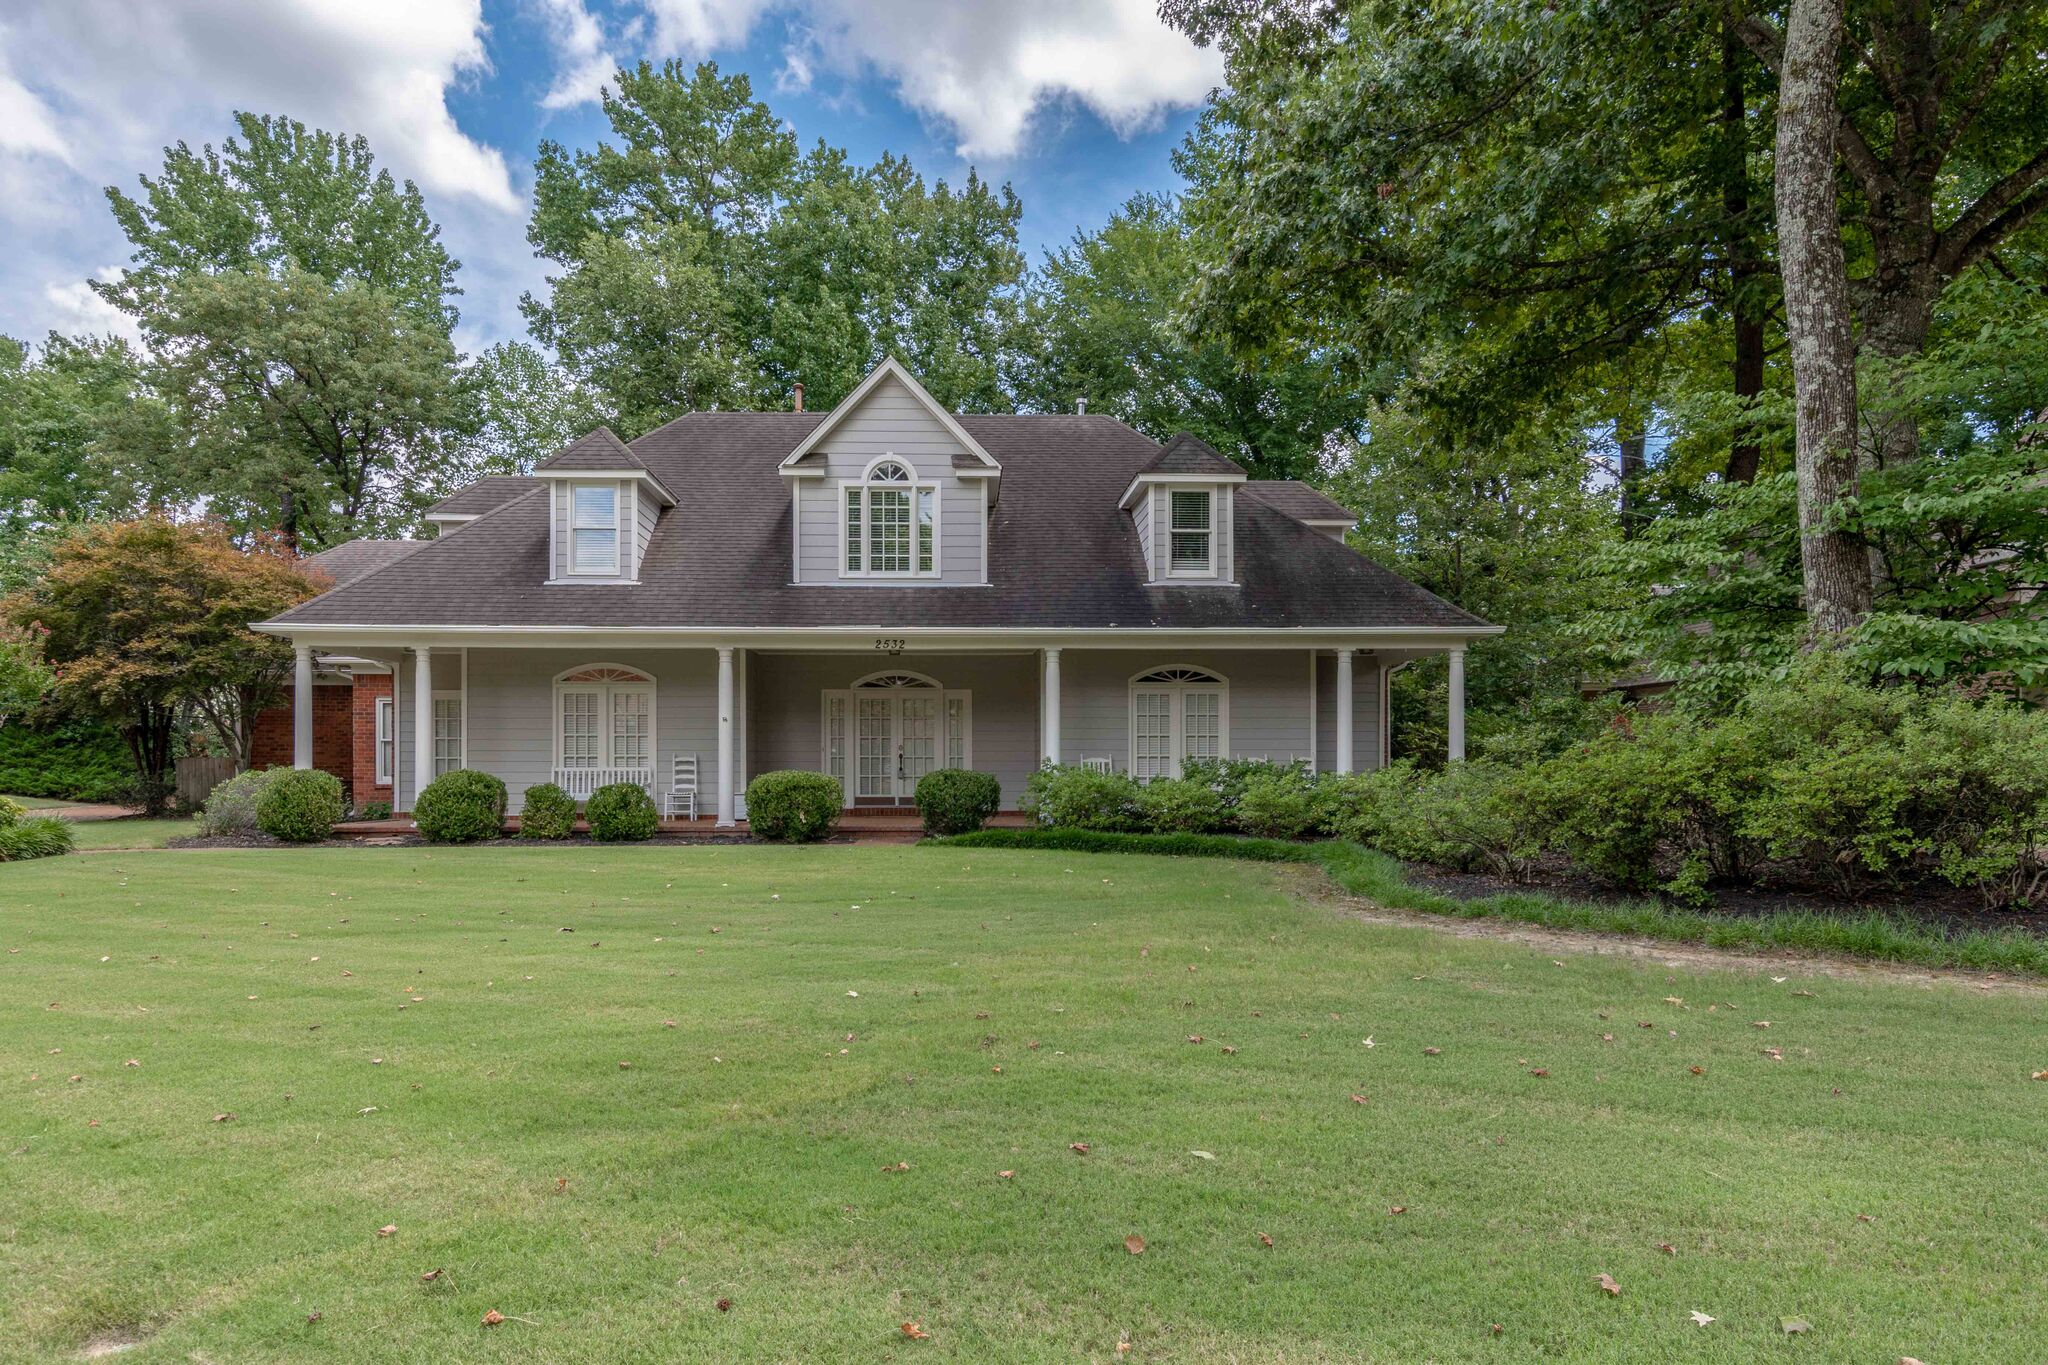 grey farmhouse style home with large front porch and white columns cordova tennessee real estate harbur realty